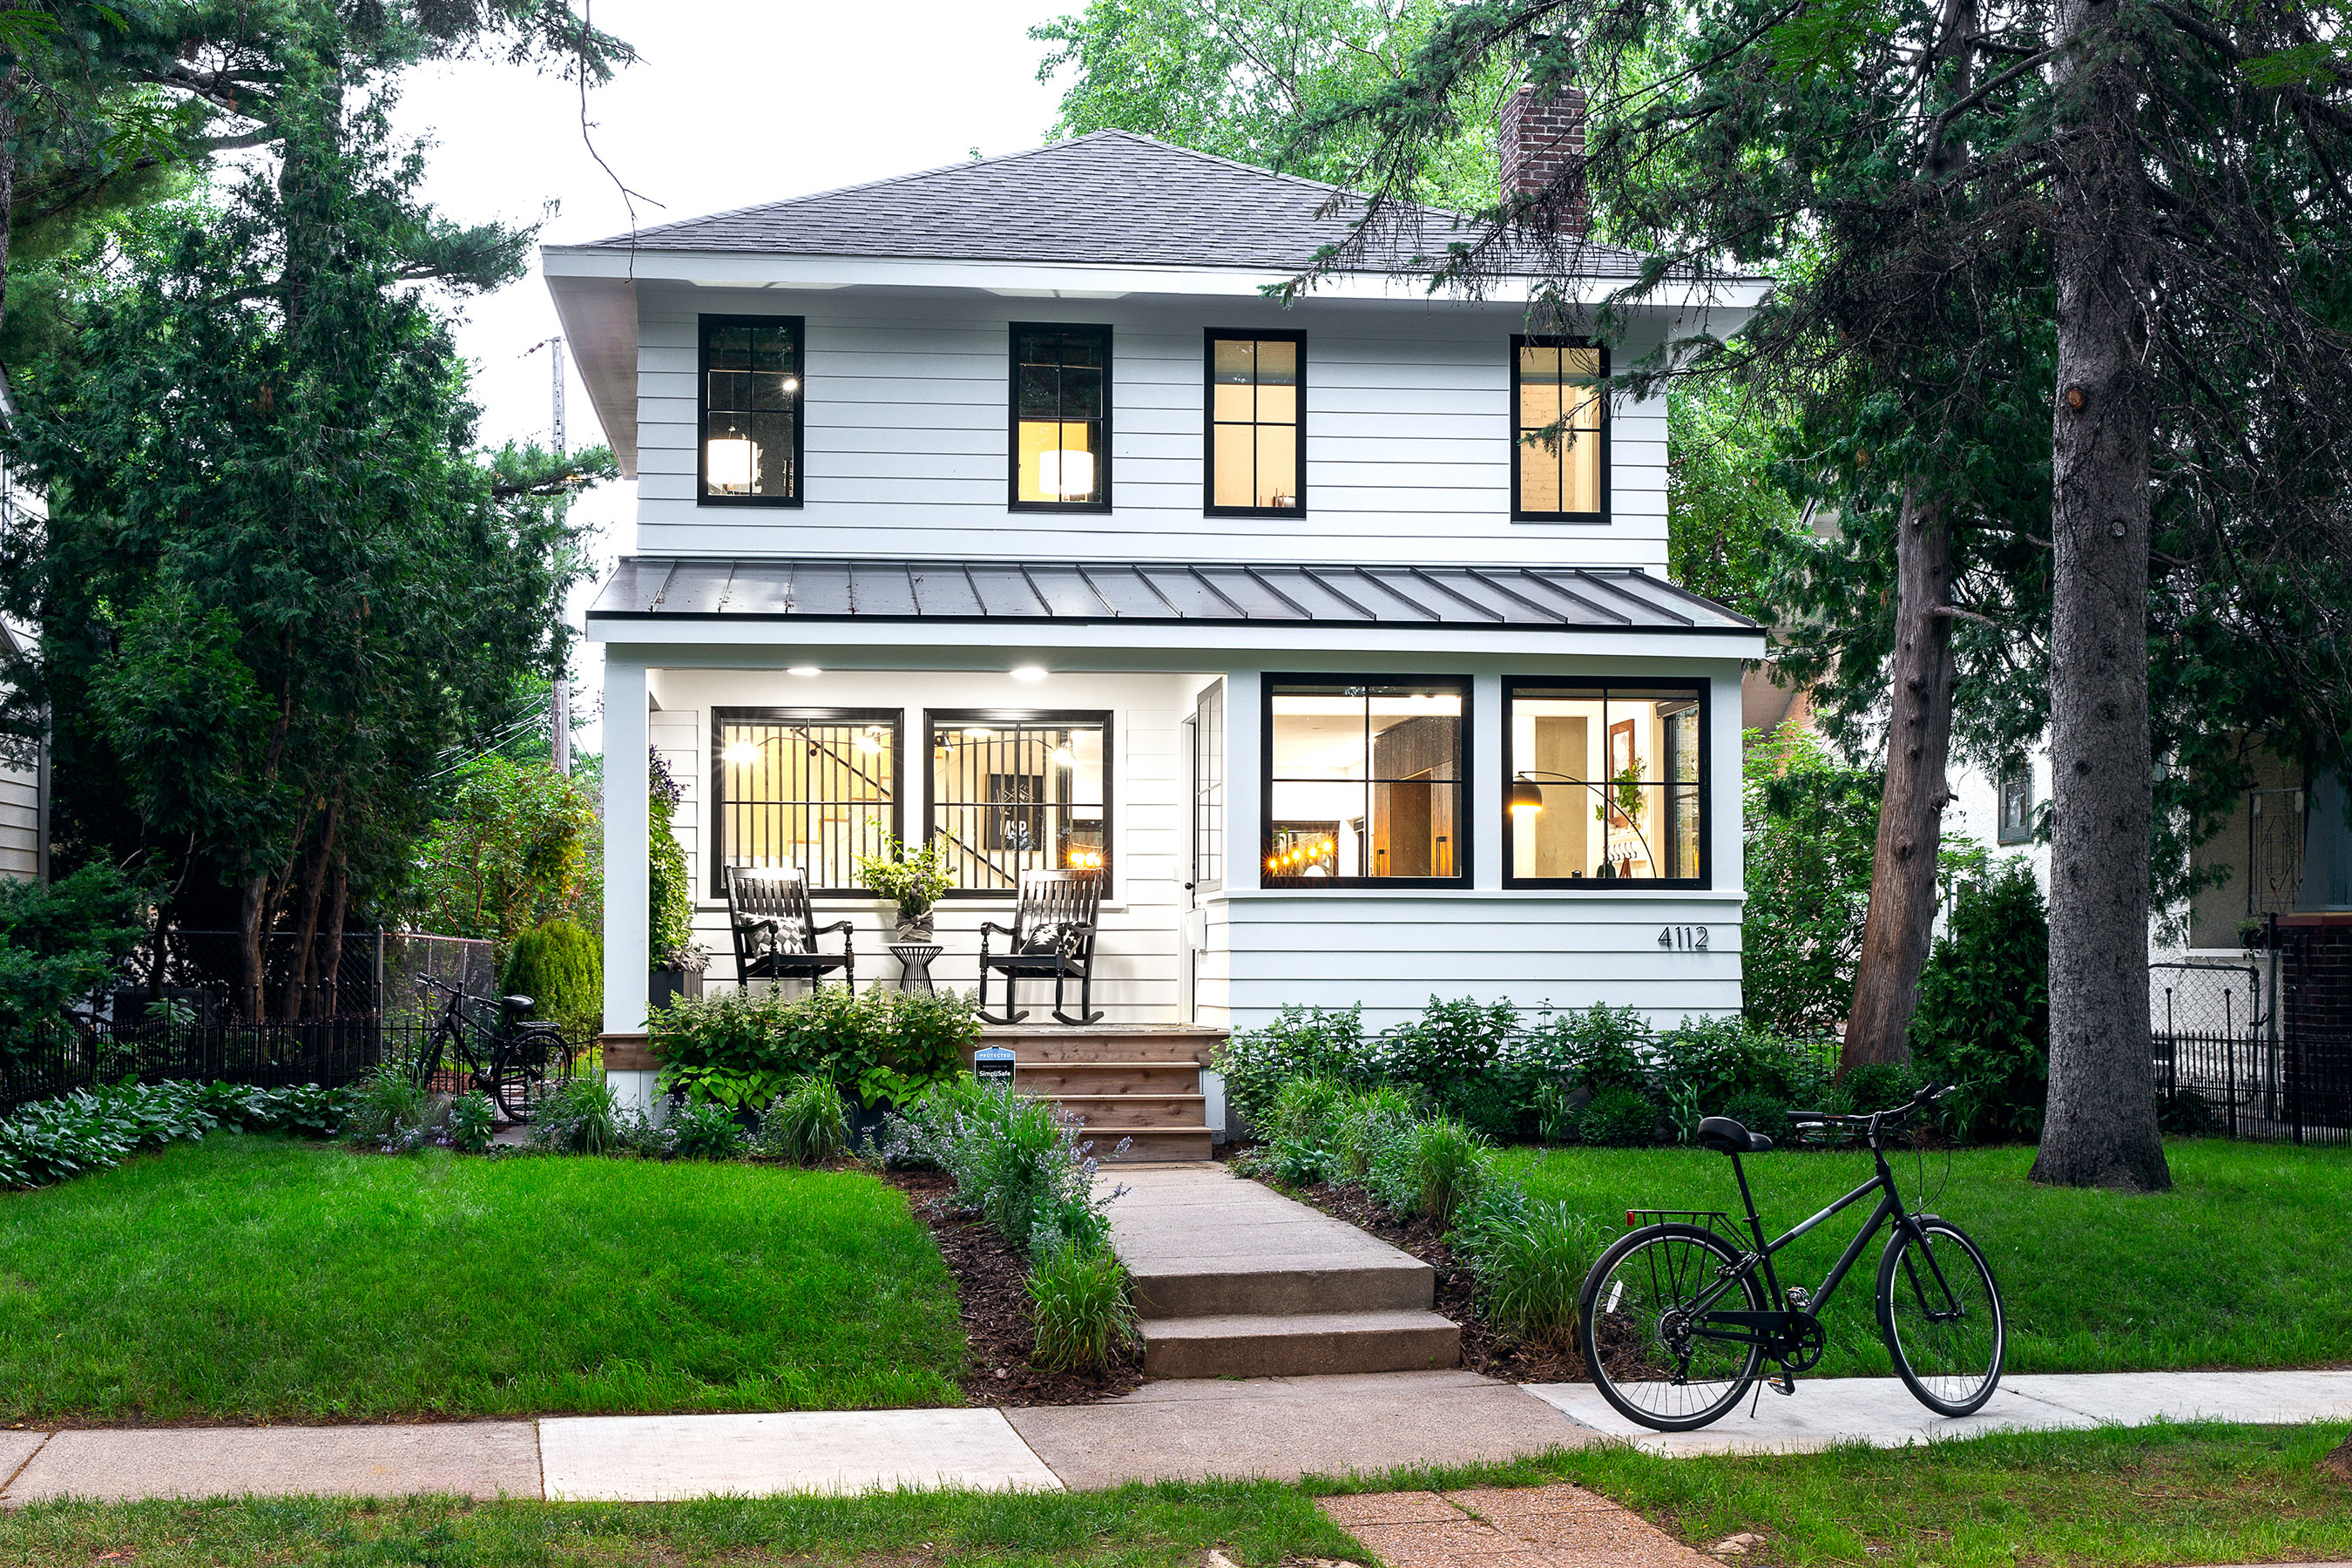 The HGTV Urban Oasis 2019 in Minneapolis will be given away to one lucky fan later this year. The prize is valued at more than $700,000 and includes the fully renovated and completely furnished Scandinavian-style farmhouse.